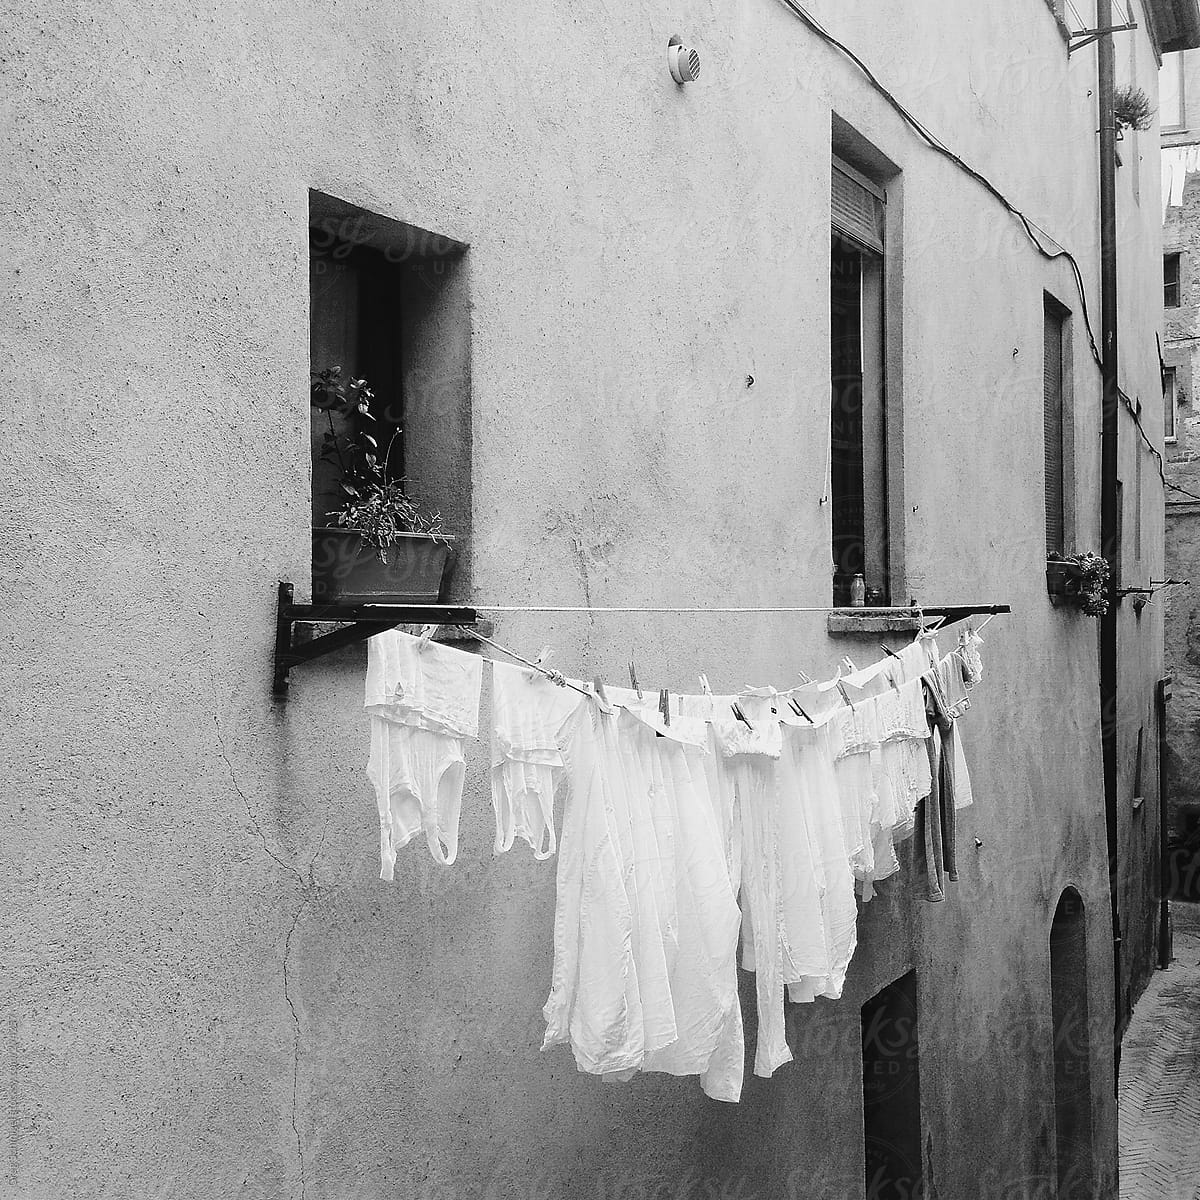 Fresh linen and laundry hanging to dry in a small town in Italy